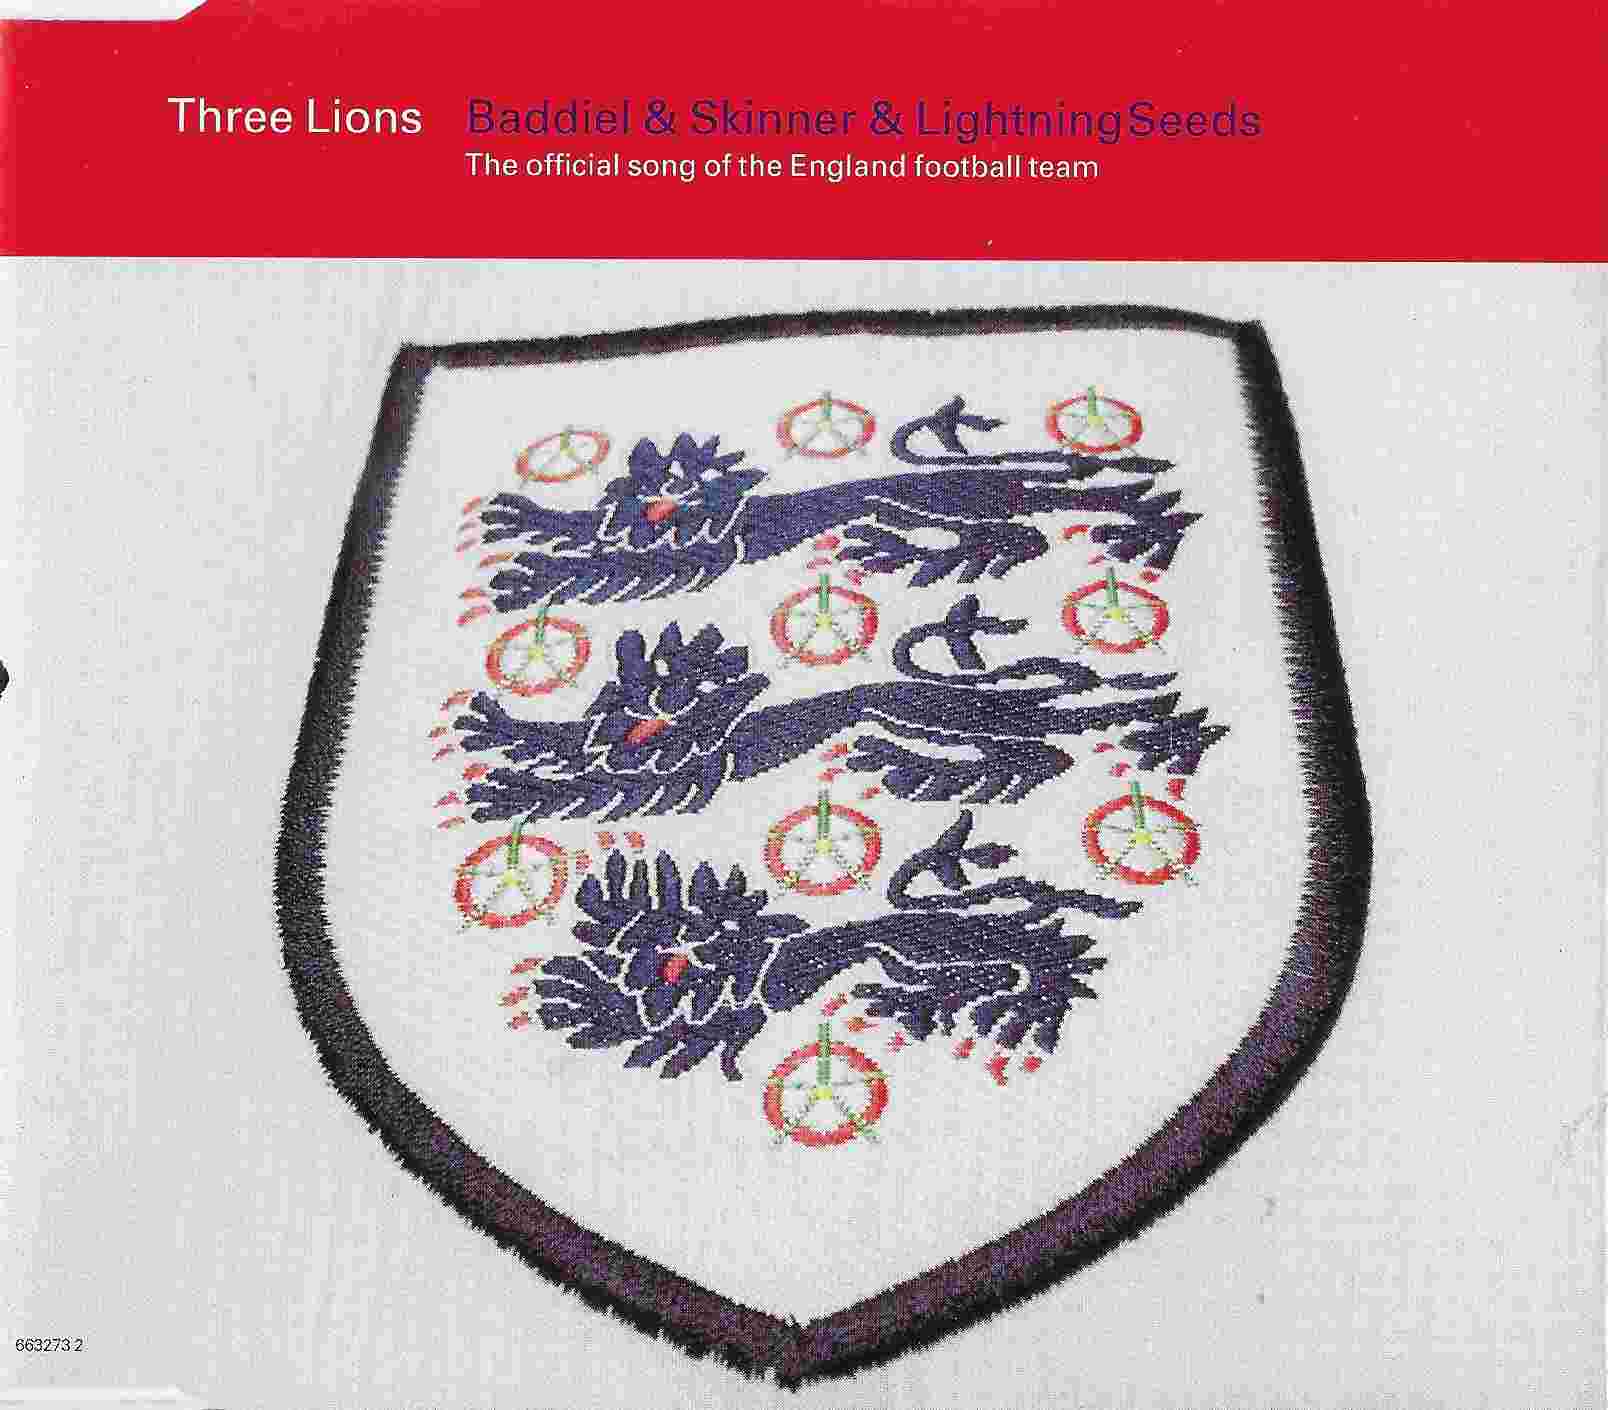 Picture of 663273 2 Three lions by artist Broudie / Skinner / Baddiel / The Lightning Seeds 